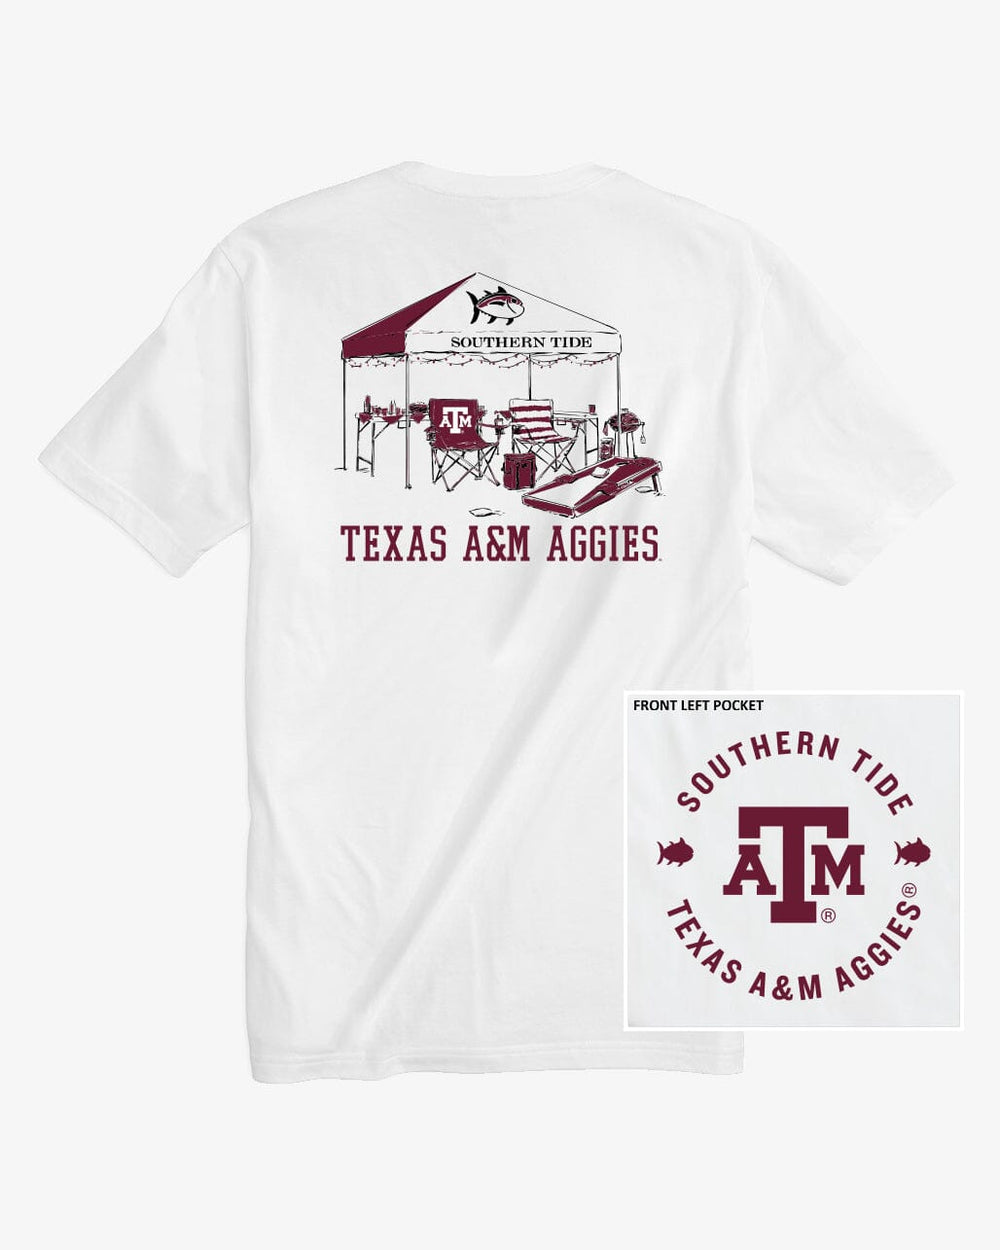 The front view of the Texas A&M Aggies Tailgate Time T-Shirt by Southern Tide - Classic White